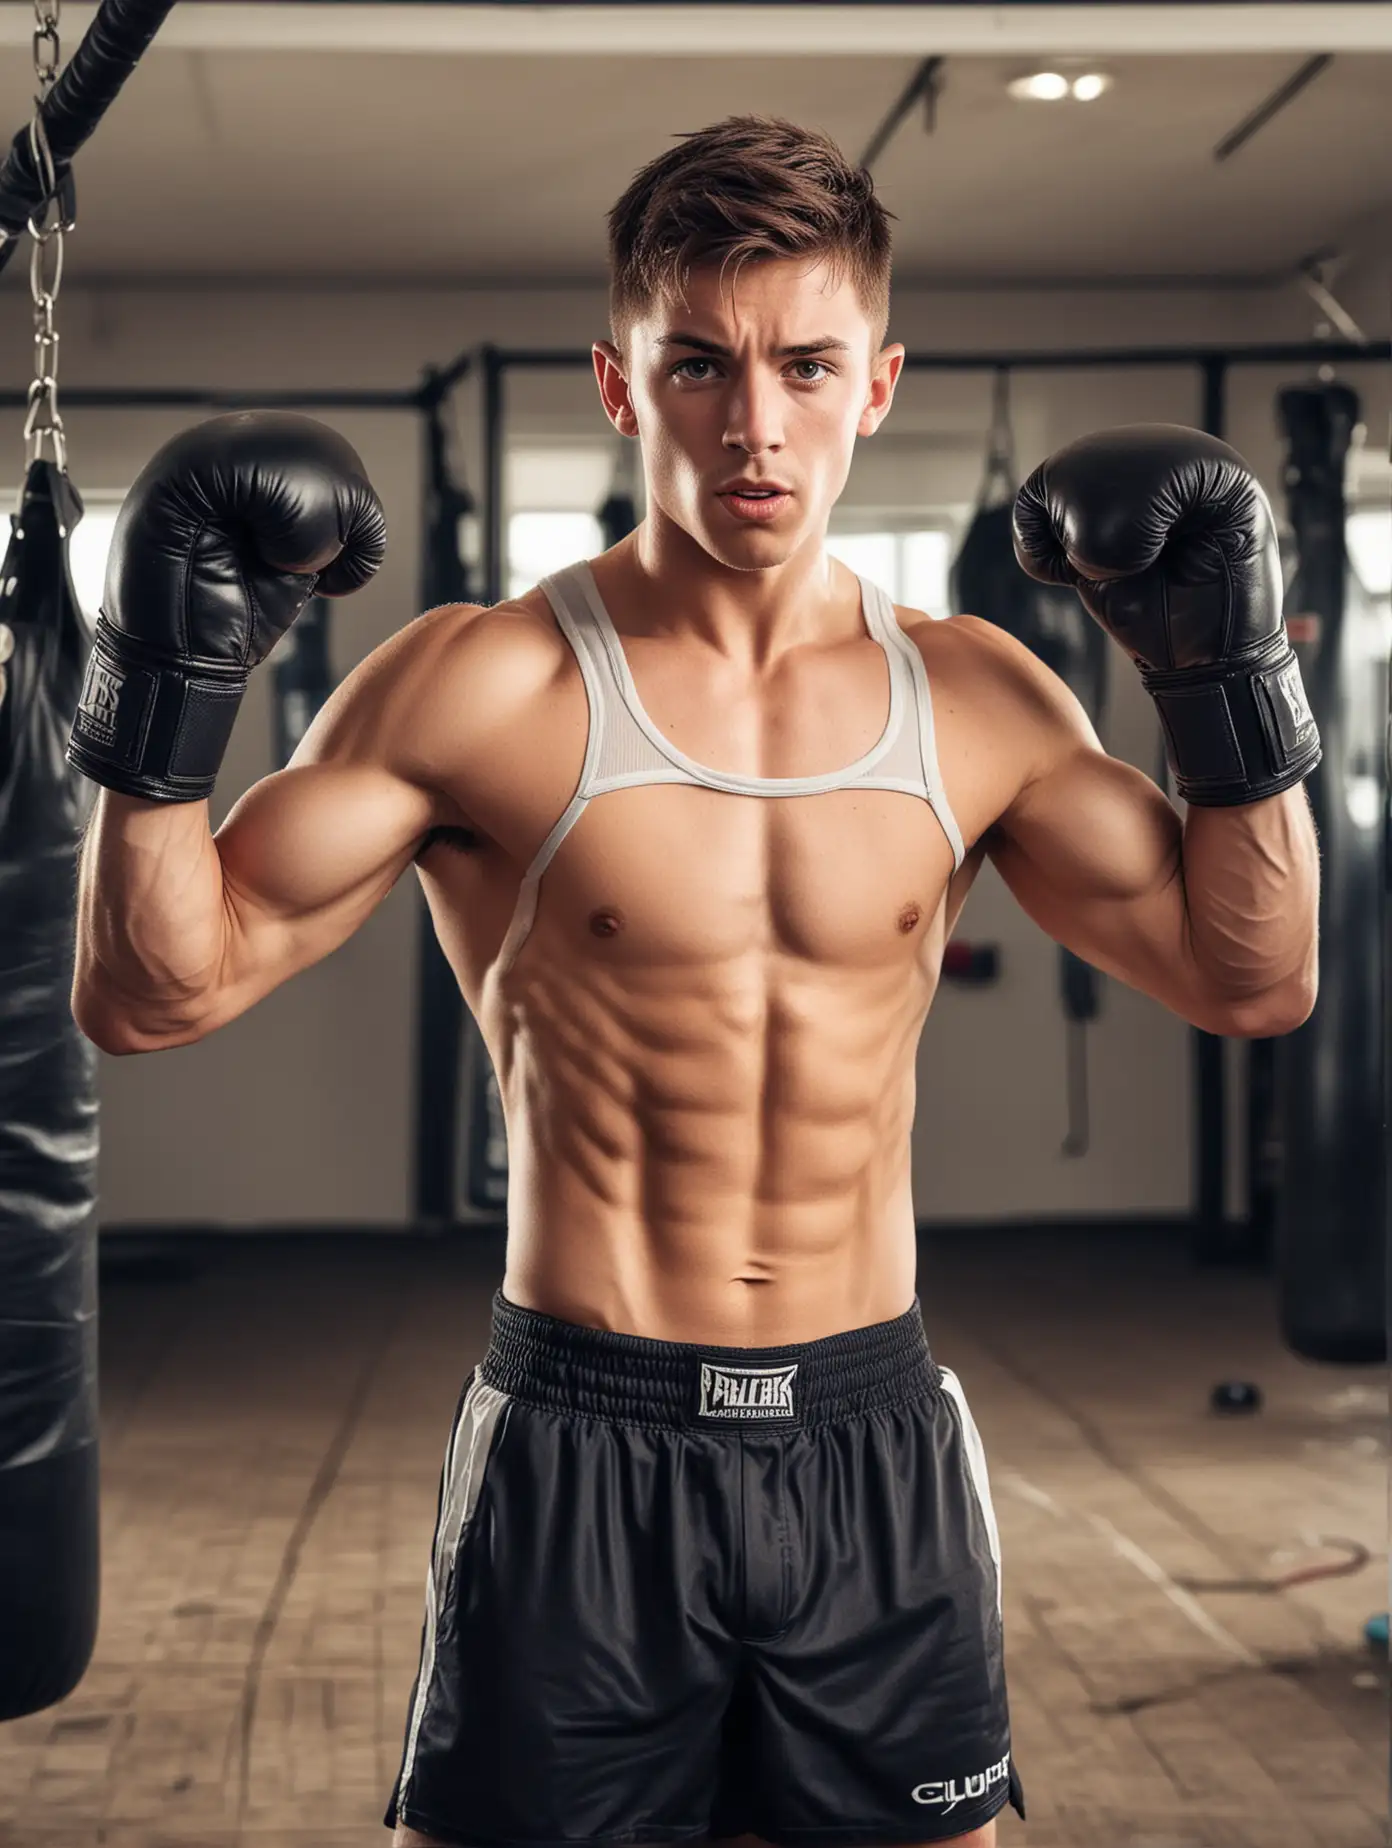 Handsome British Boxer in Gym Shows Off Perfect Muscles